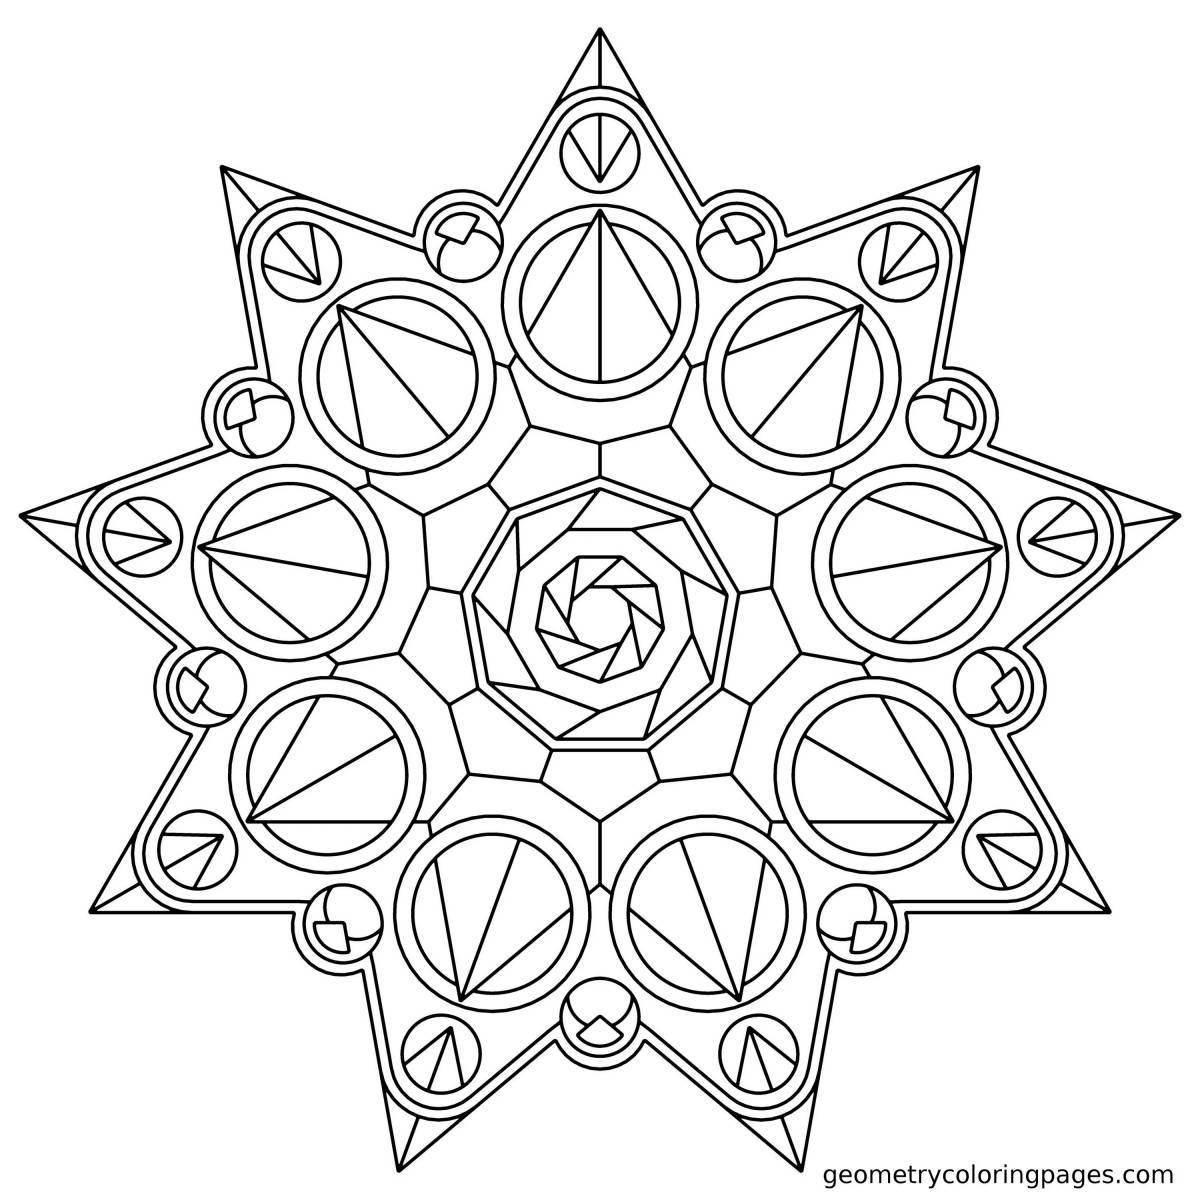 Creative geometric coloring page for kids